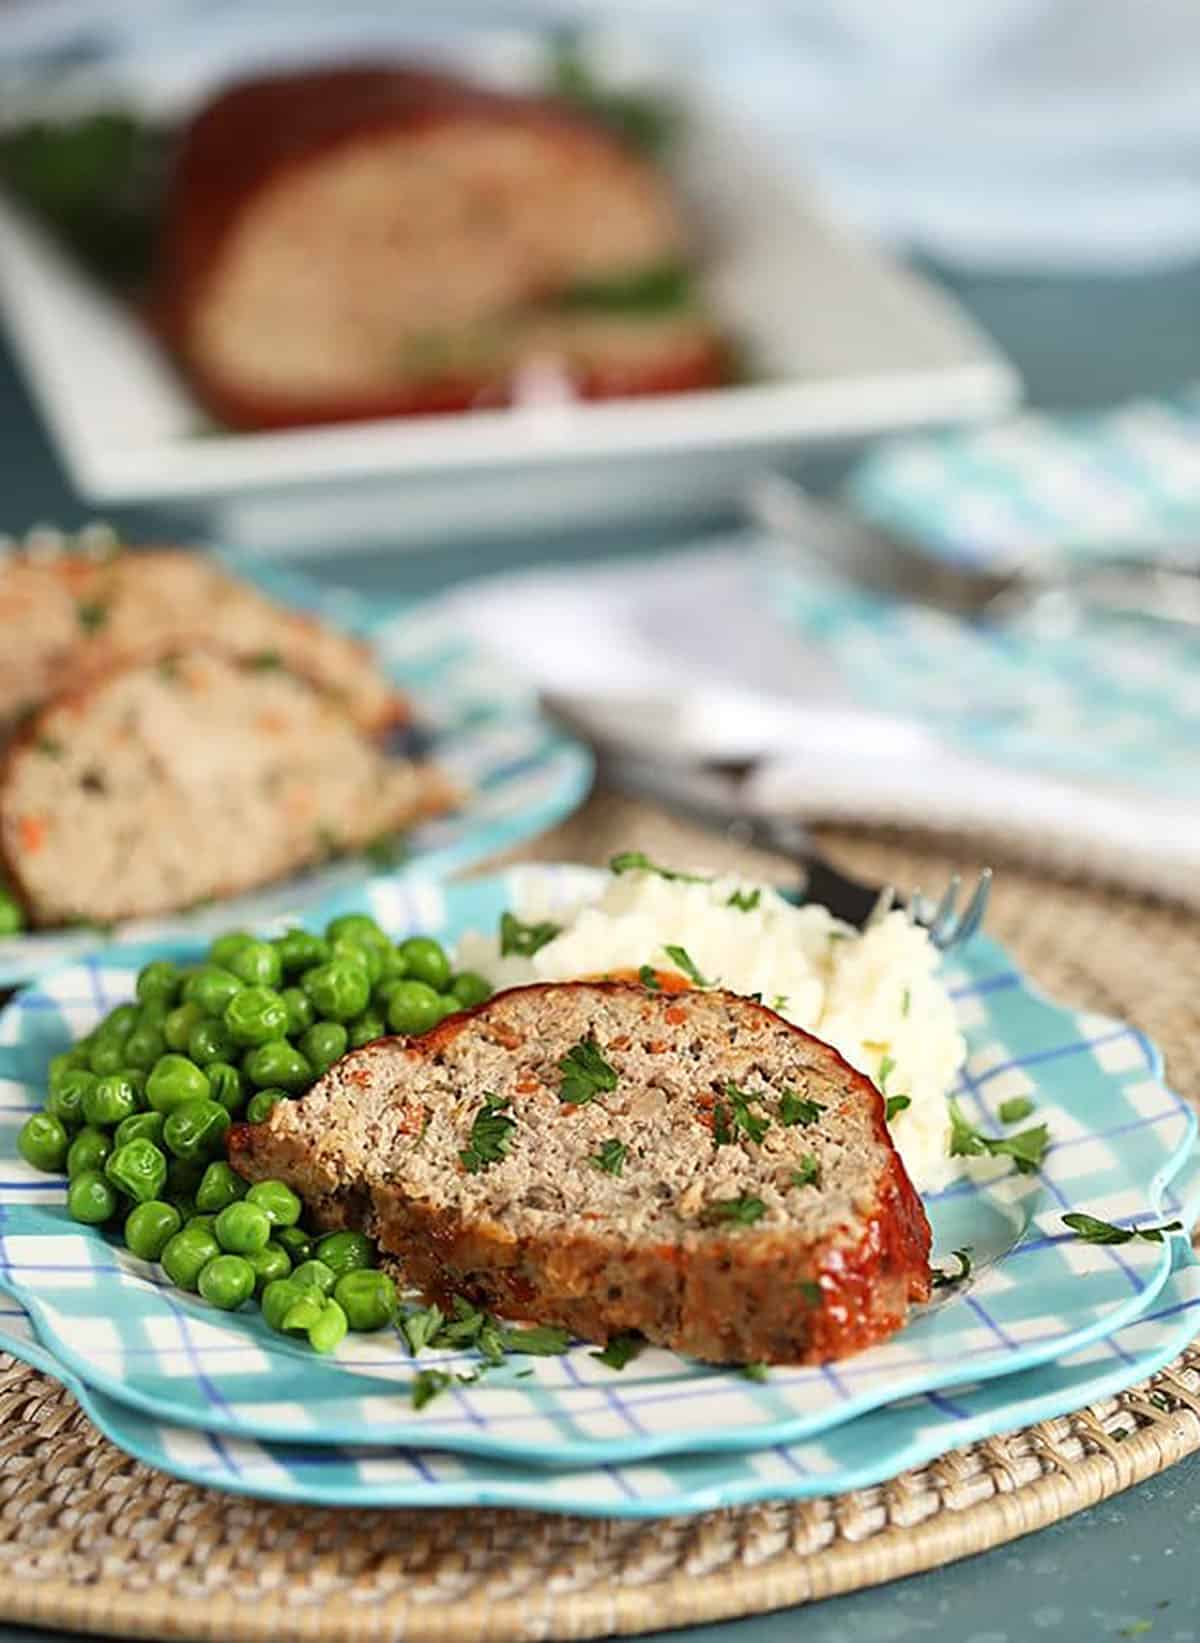 Turkey meatloaf on a plaid plate with mashed potatoes and peas.